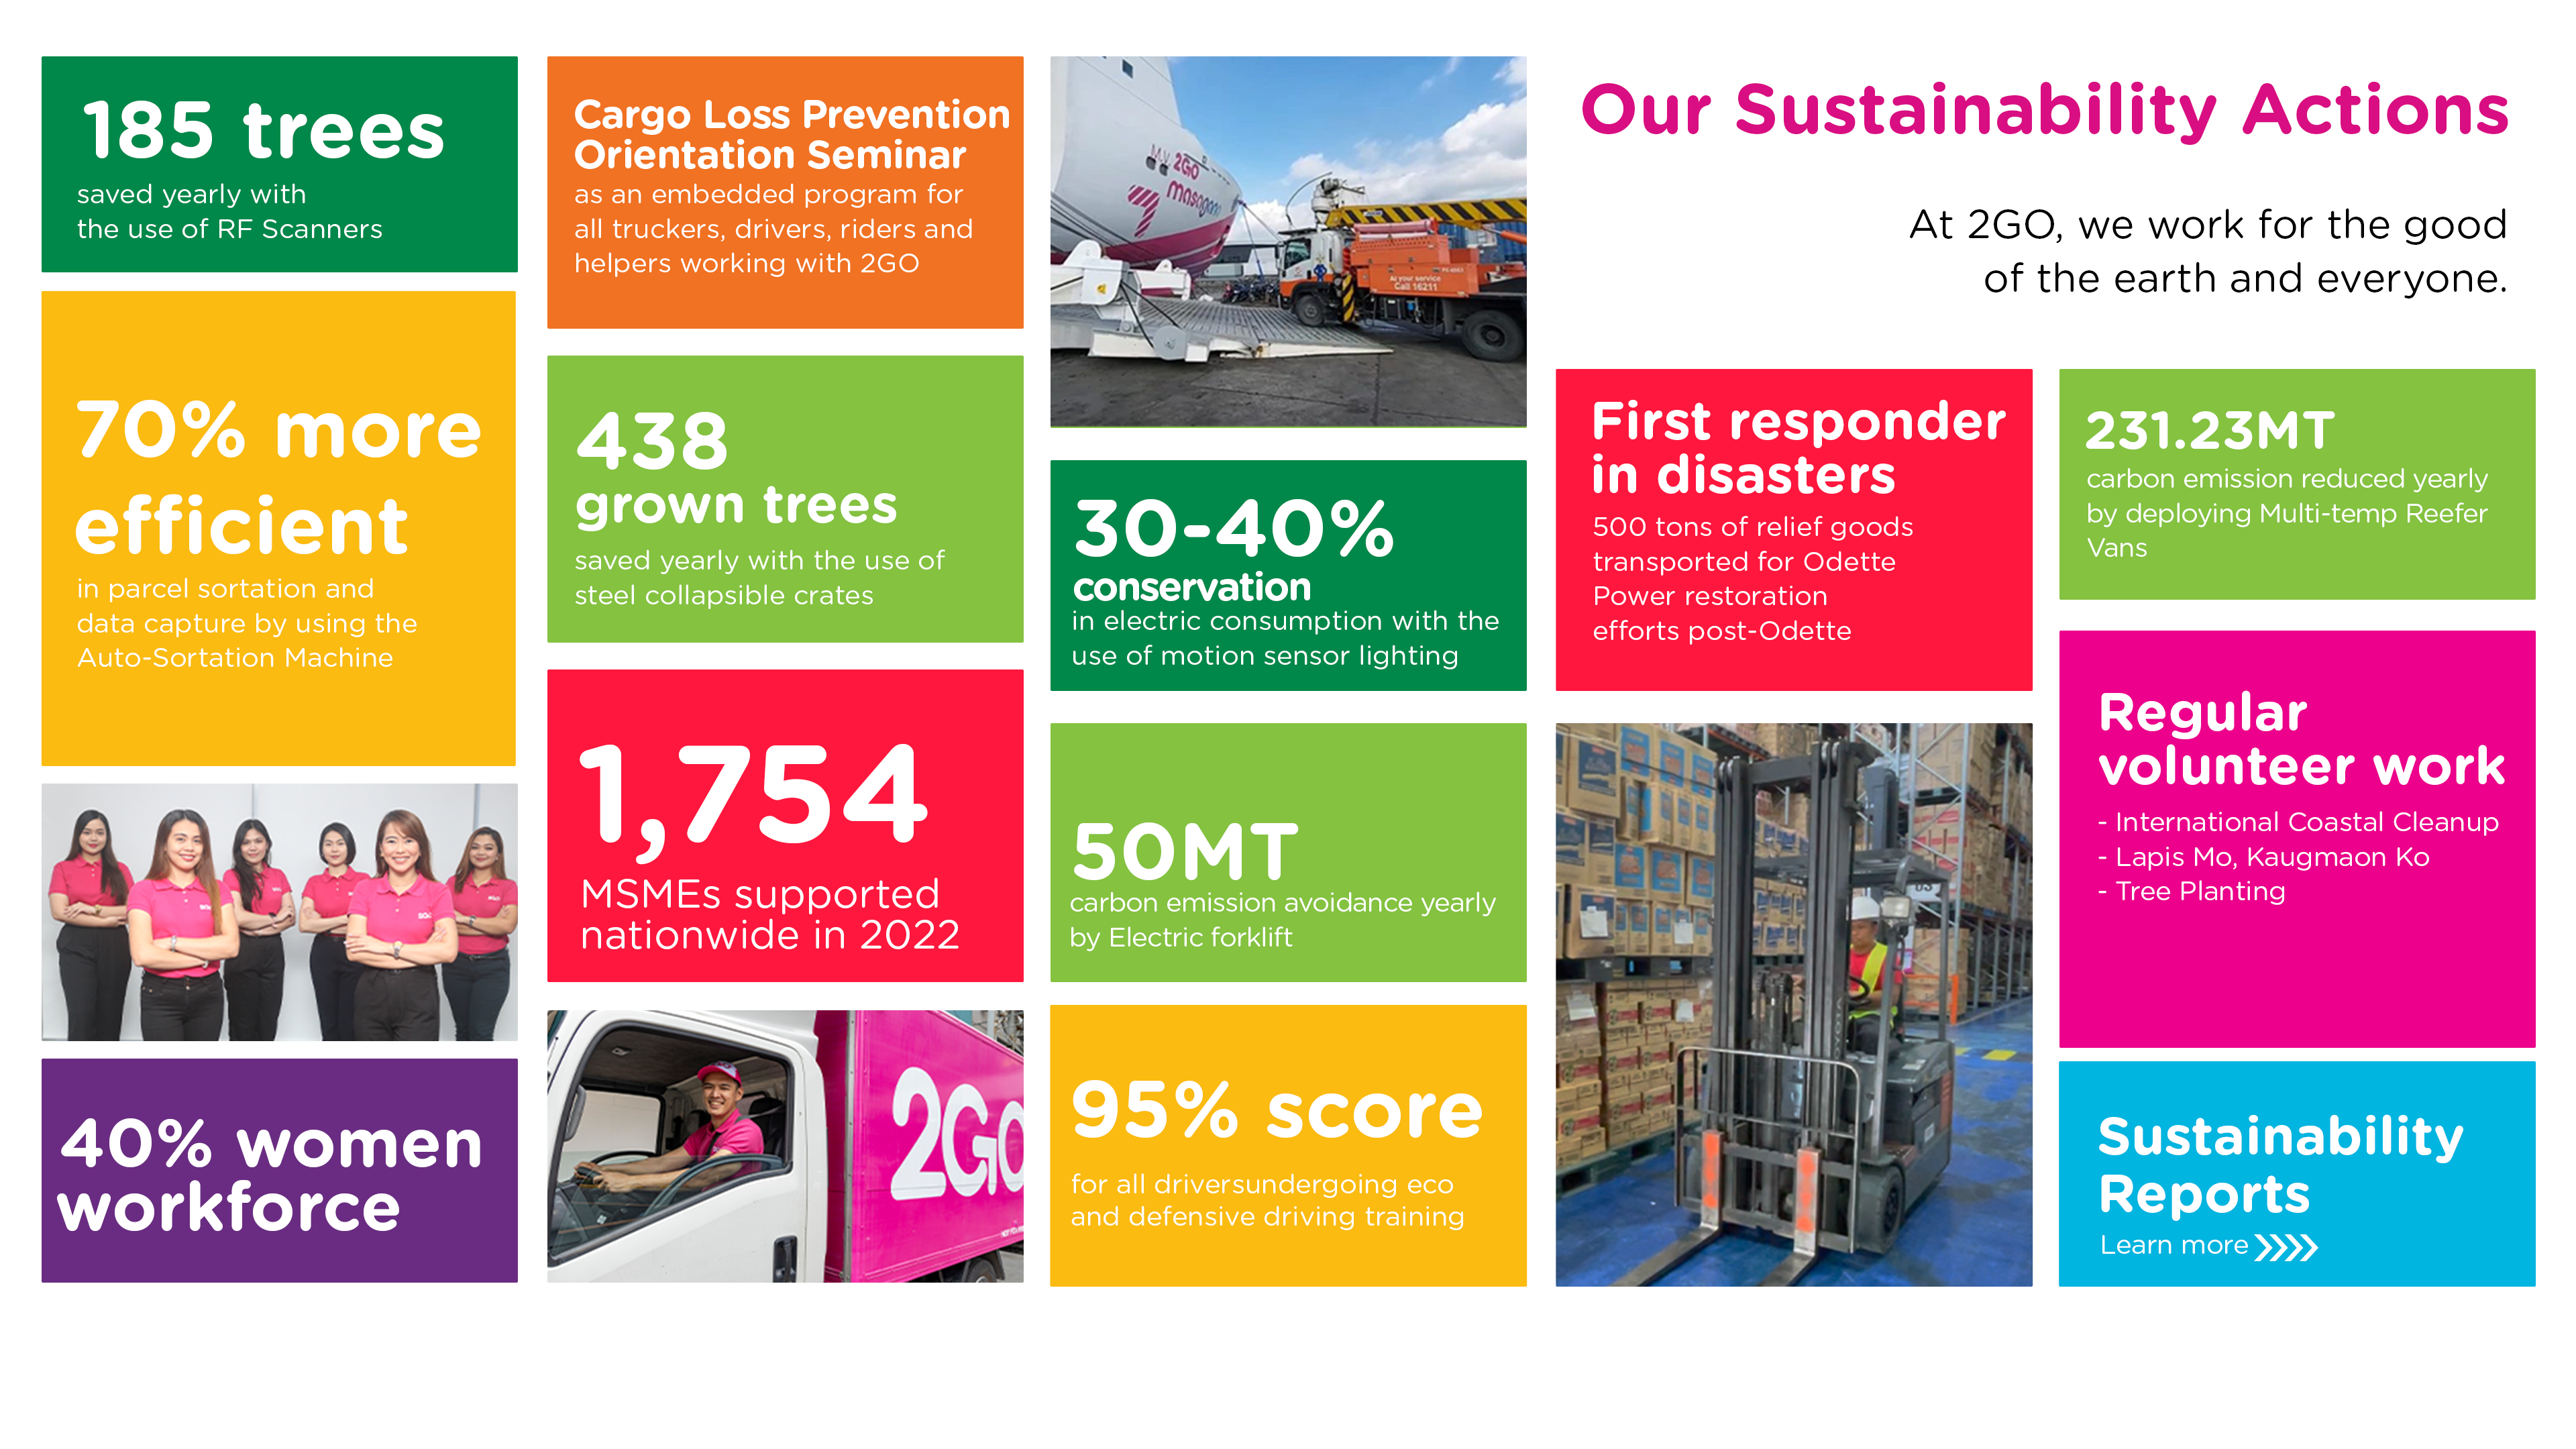 4 - Our Sustainability Actions